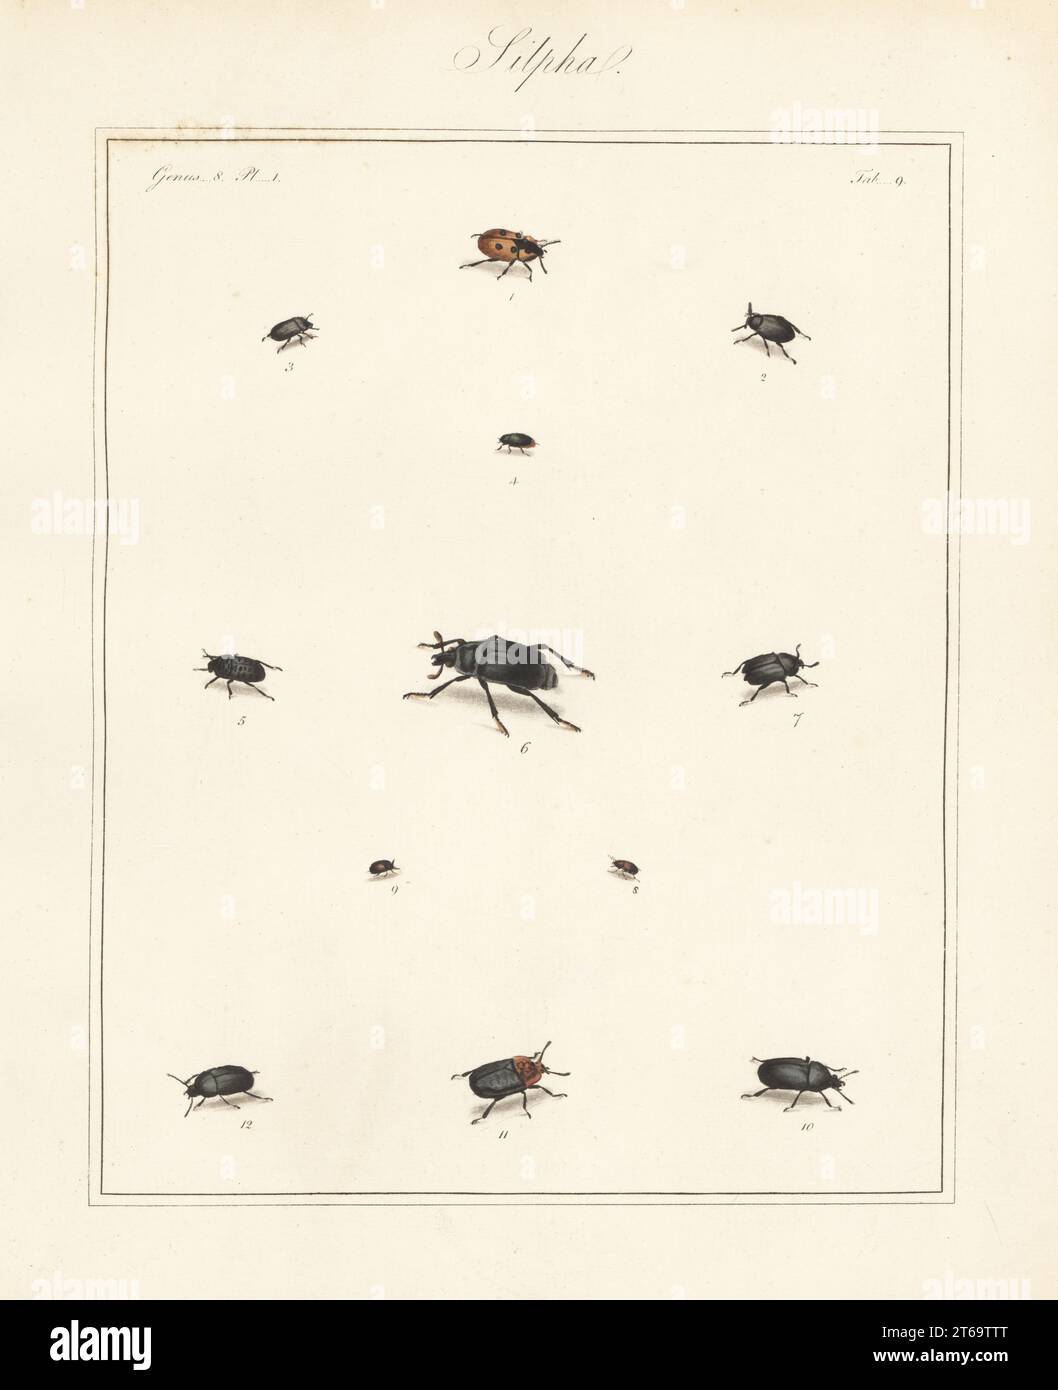 Carrion beetle, Silpha 4-punctata 1, black snail beetle, Silpha atrata 2, Helophorus aquaticus 4, Thanatophilus rugosus 5, Nicrophorus germanicus 6, Thanatophilus sinuatus 7, Soronia grisea 8, Omosita depressa 9, Silpha laevigata 10, red-breasted carrion beetle, Oiceoptoma thoracicum 11, and Silpha obscura 12. Handcoloured copperplate engraving from Thomas Martyns The English Entomologist, Exhibiting all the Coleopterous Insects found in England, Academy for Illustrating and Painting Natural History, London, 1792. Stock Photo